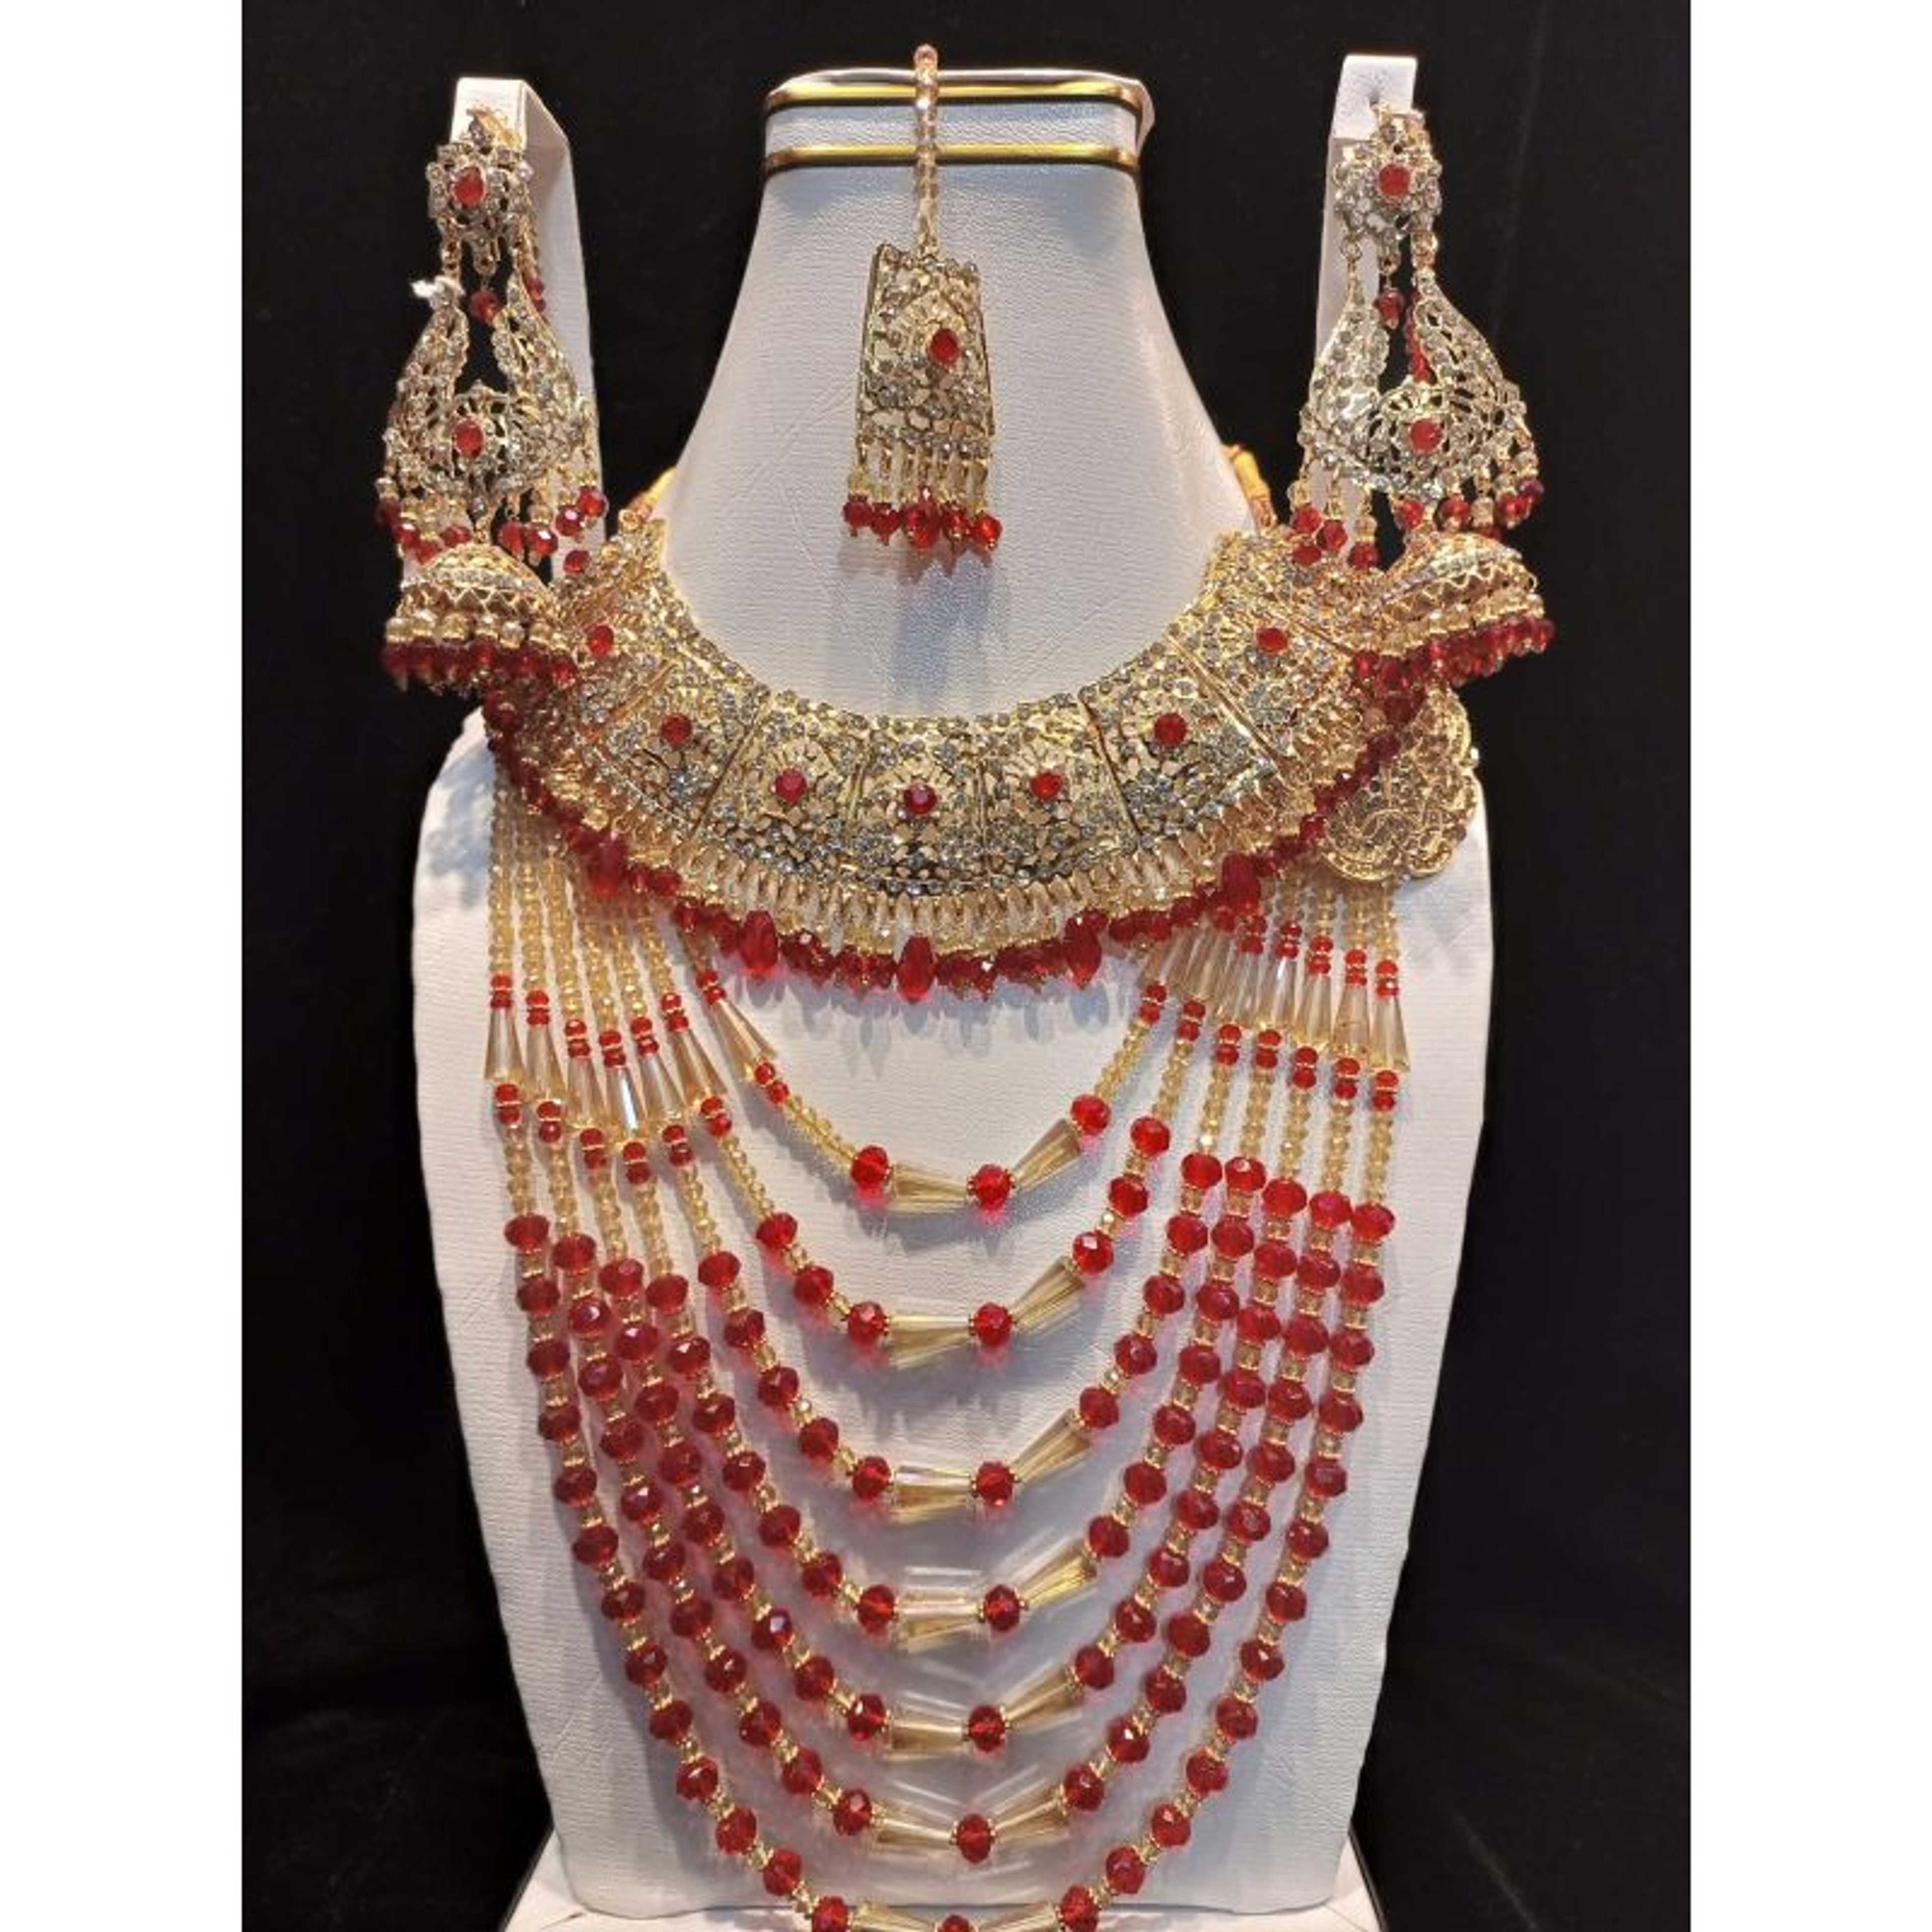 New Trending Bridal Jewelry Set With Red Pearls